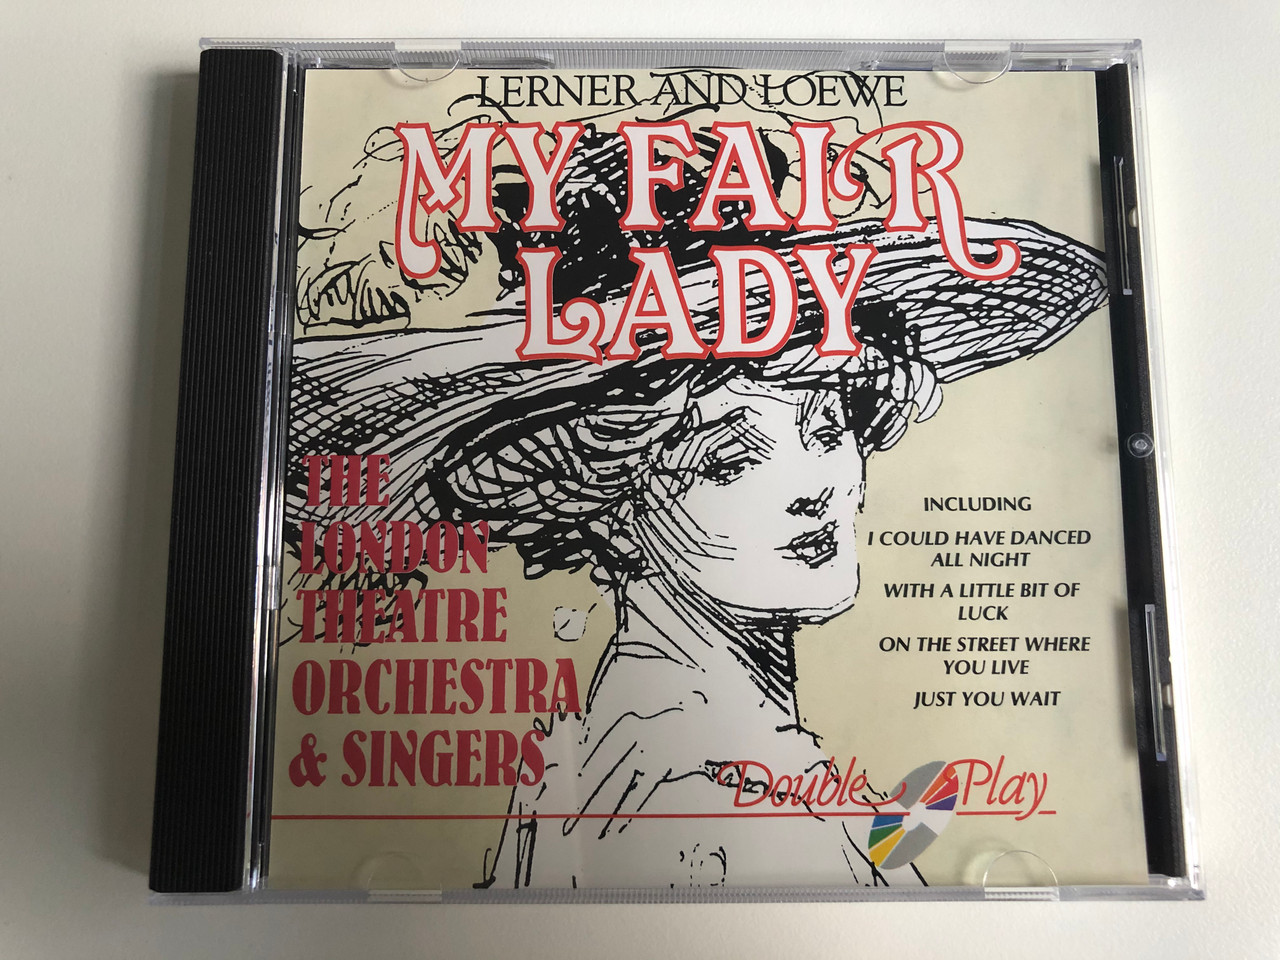 https://cdn10.bigcommerce.com/s-62bdpkt7pb/products/30355/images/179675/Lerner_And_Loewe_My_Fair_Lady_The_London_Theatre_Orchestra_Singers_Including_I_Could_Have_Danced_All_Night_With_A_Little_Bit_Of_Luck_On_The_Street_Where_You_Live_Just_You_Wait_Tring_1__06010.1622217242.1280.1280.JPG?c=2&_ga=2.37898403.124754382.1622221975-1131994027.1622221975